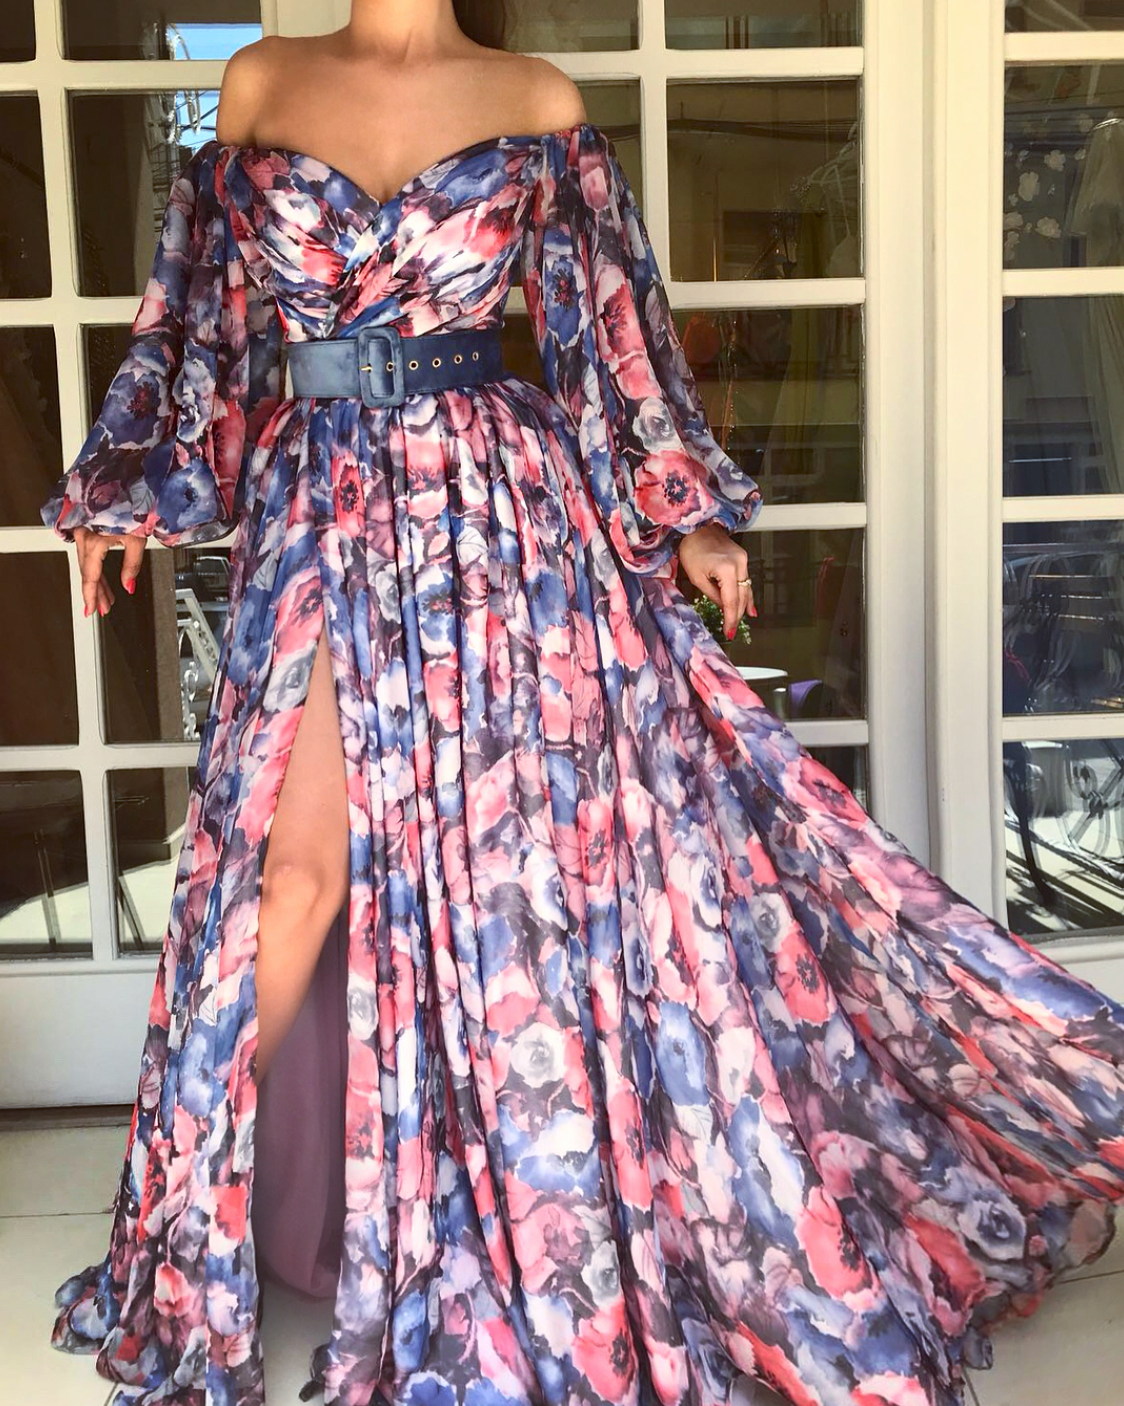 Colorful A-Line dress with long off the shoulder sleeves, belt and printed flowers